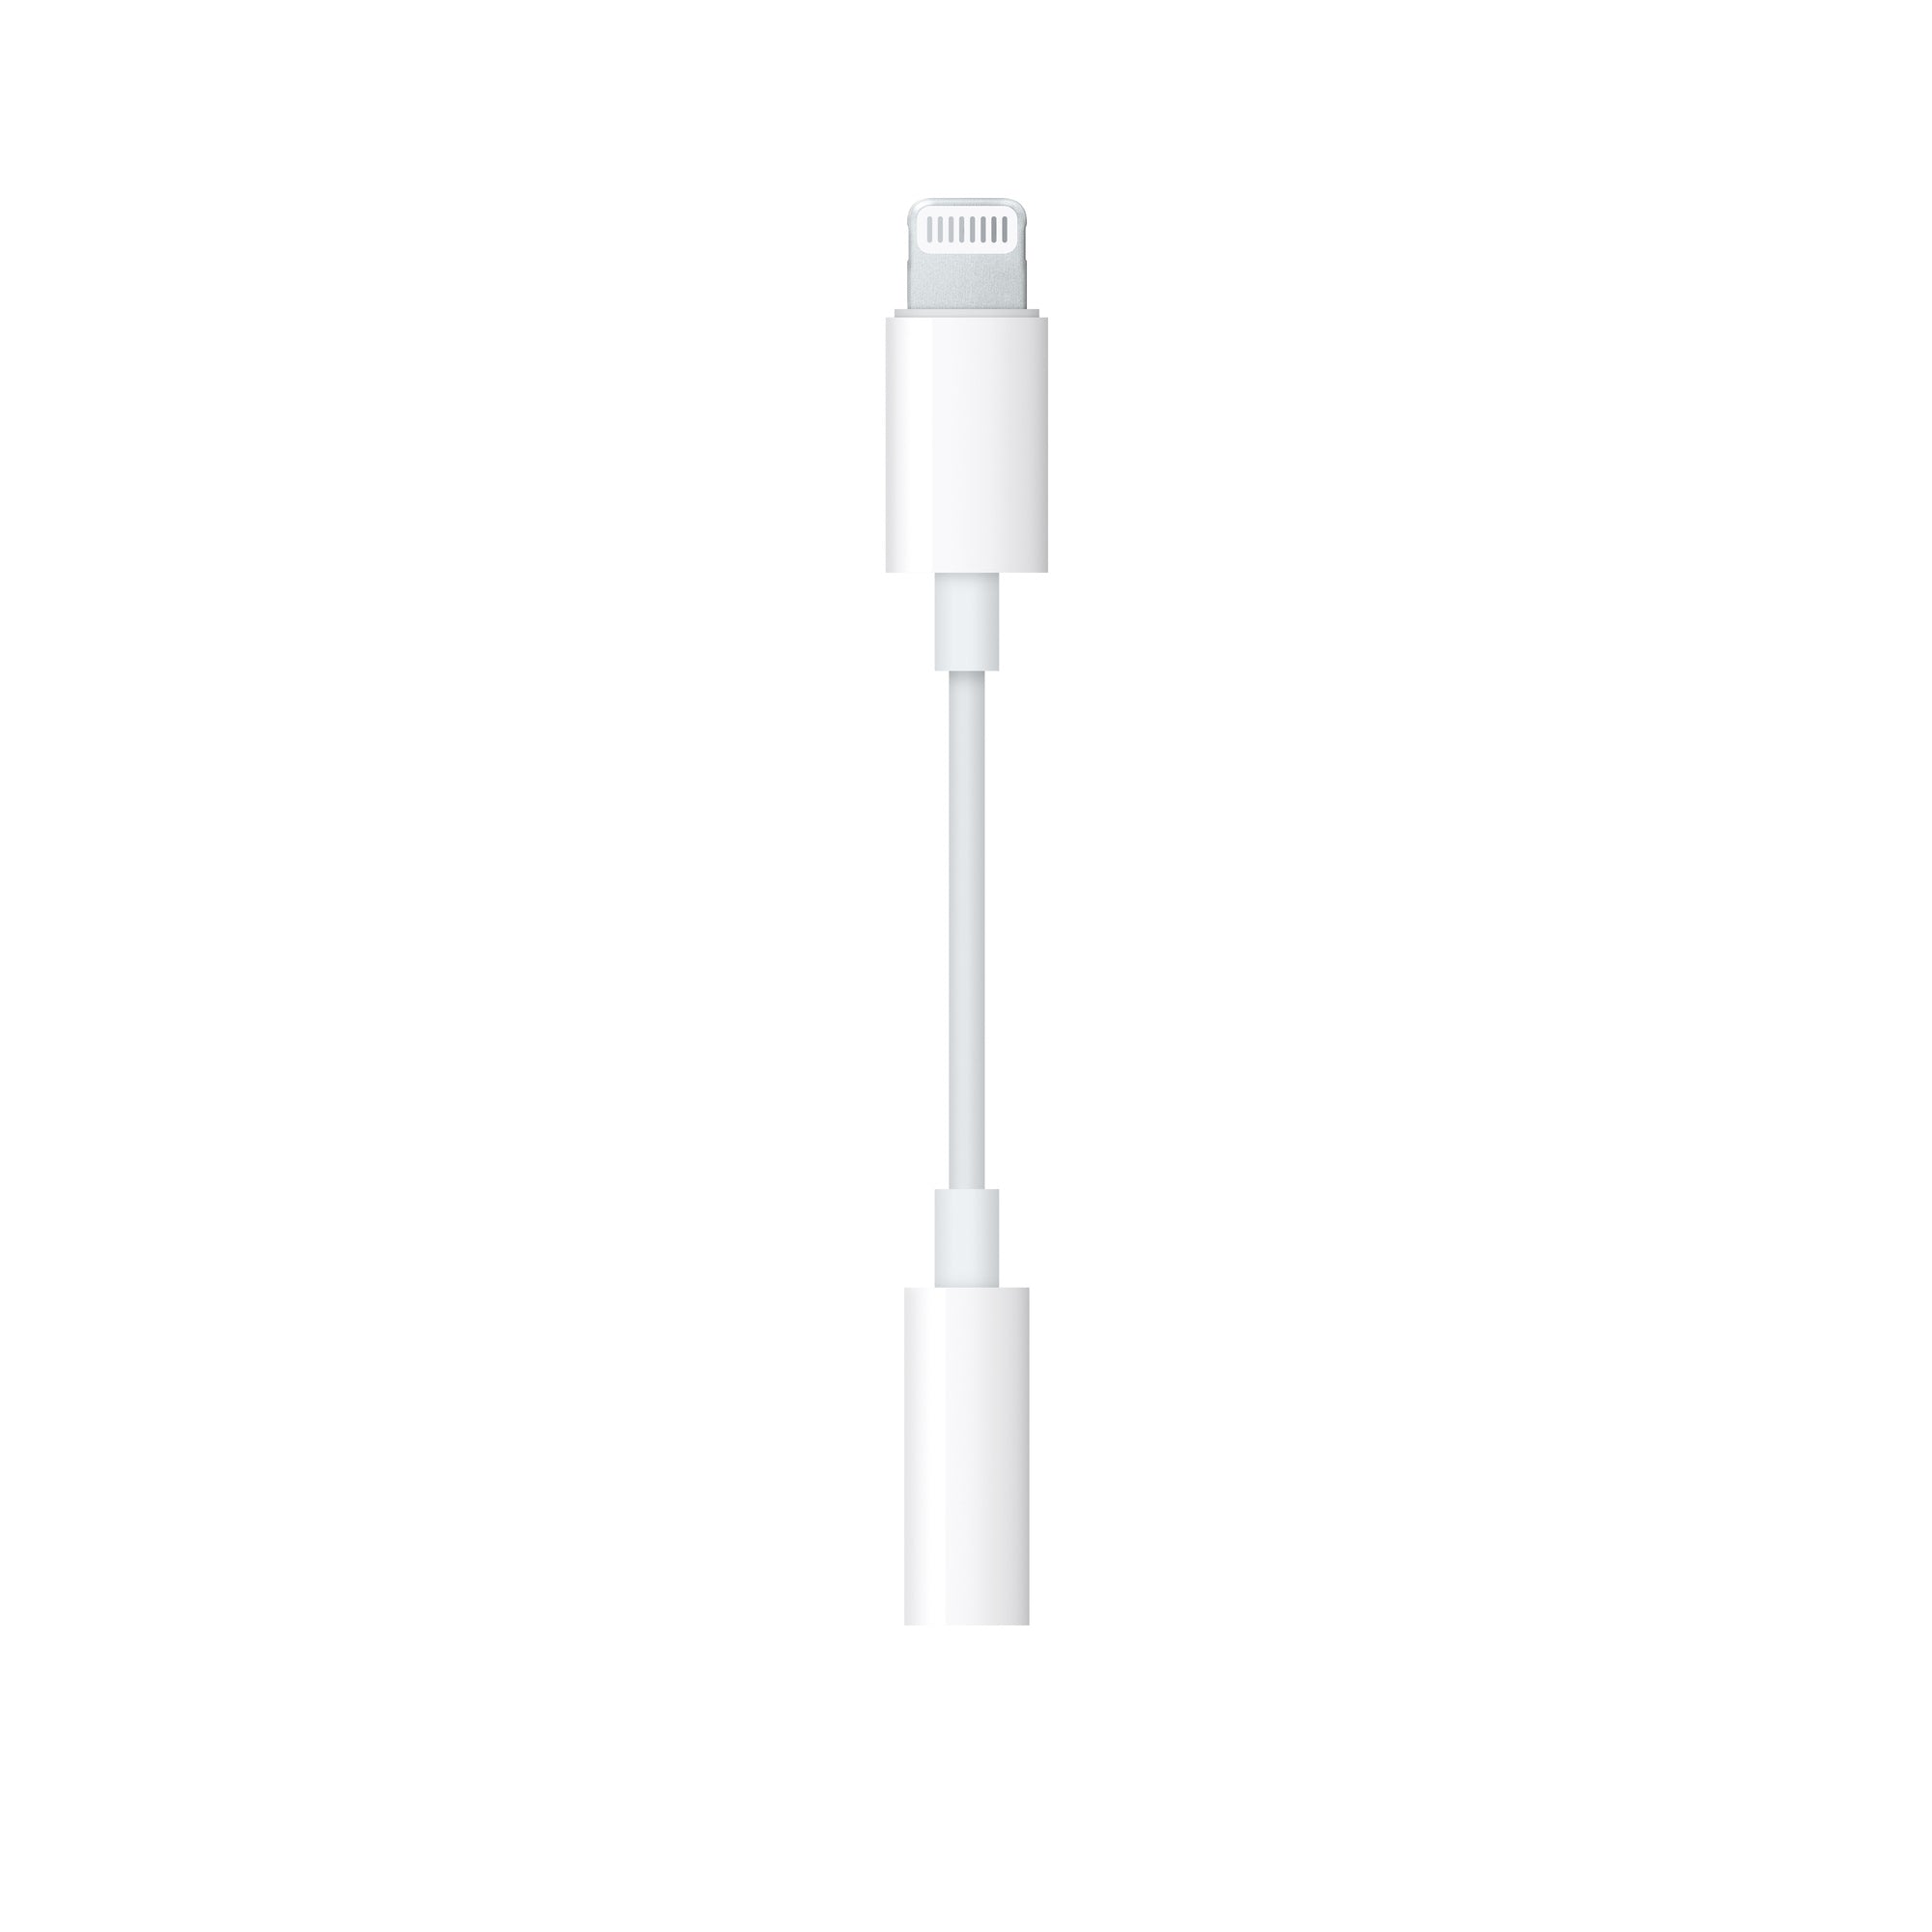 Apple iPhone 6 Plus Heaphone Jack Connector (Lightning to 3.5mm)